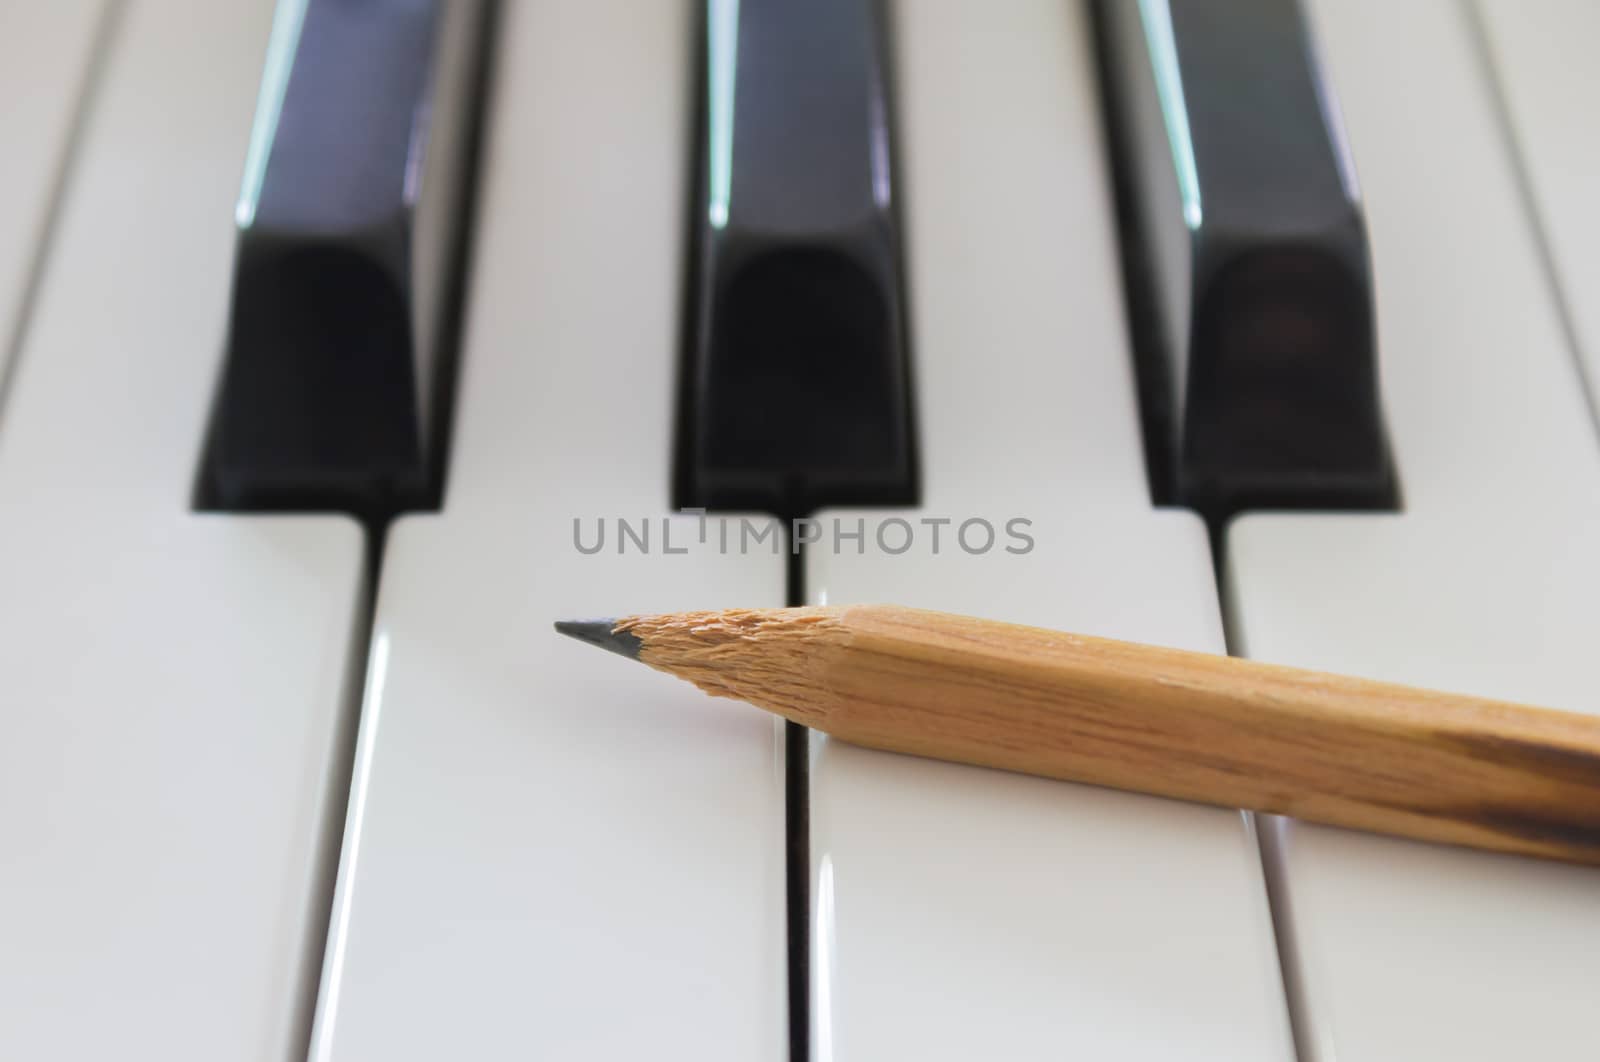 Old Pencil on White Keys of Electric Piano in Crosswise View. Concept about Piano Playing or Piano Learning